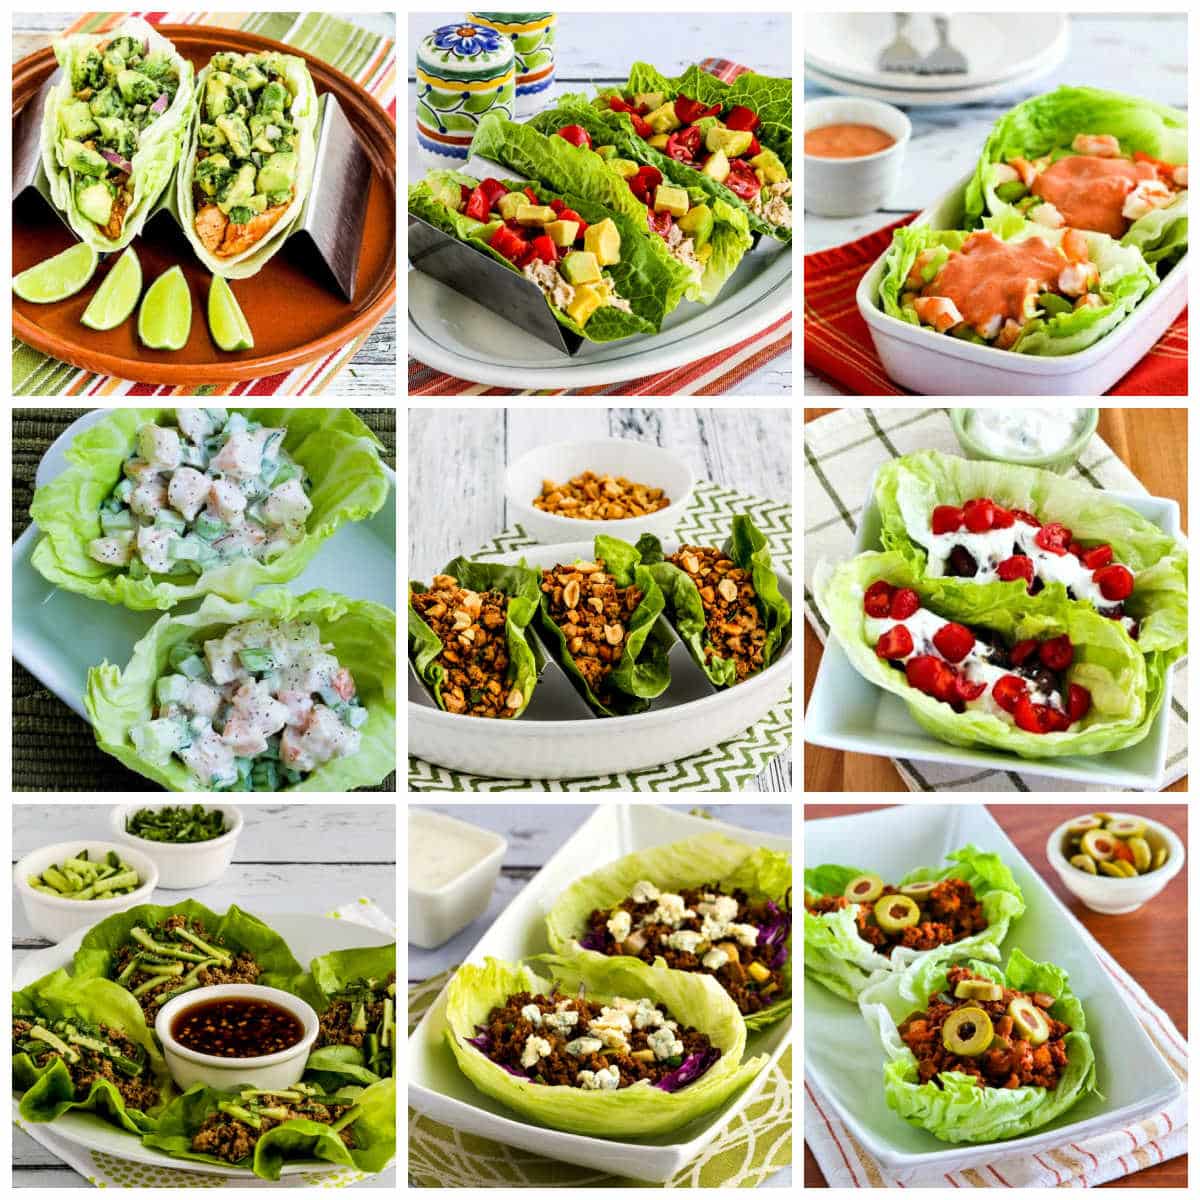 Collage image for Low-Carb and Keto Lettuce Wraps showing featured recipes.